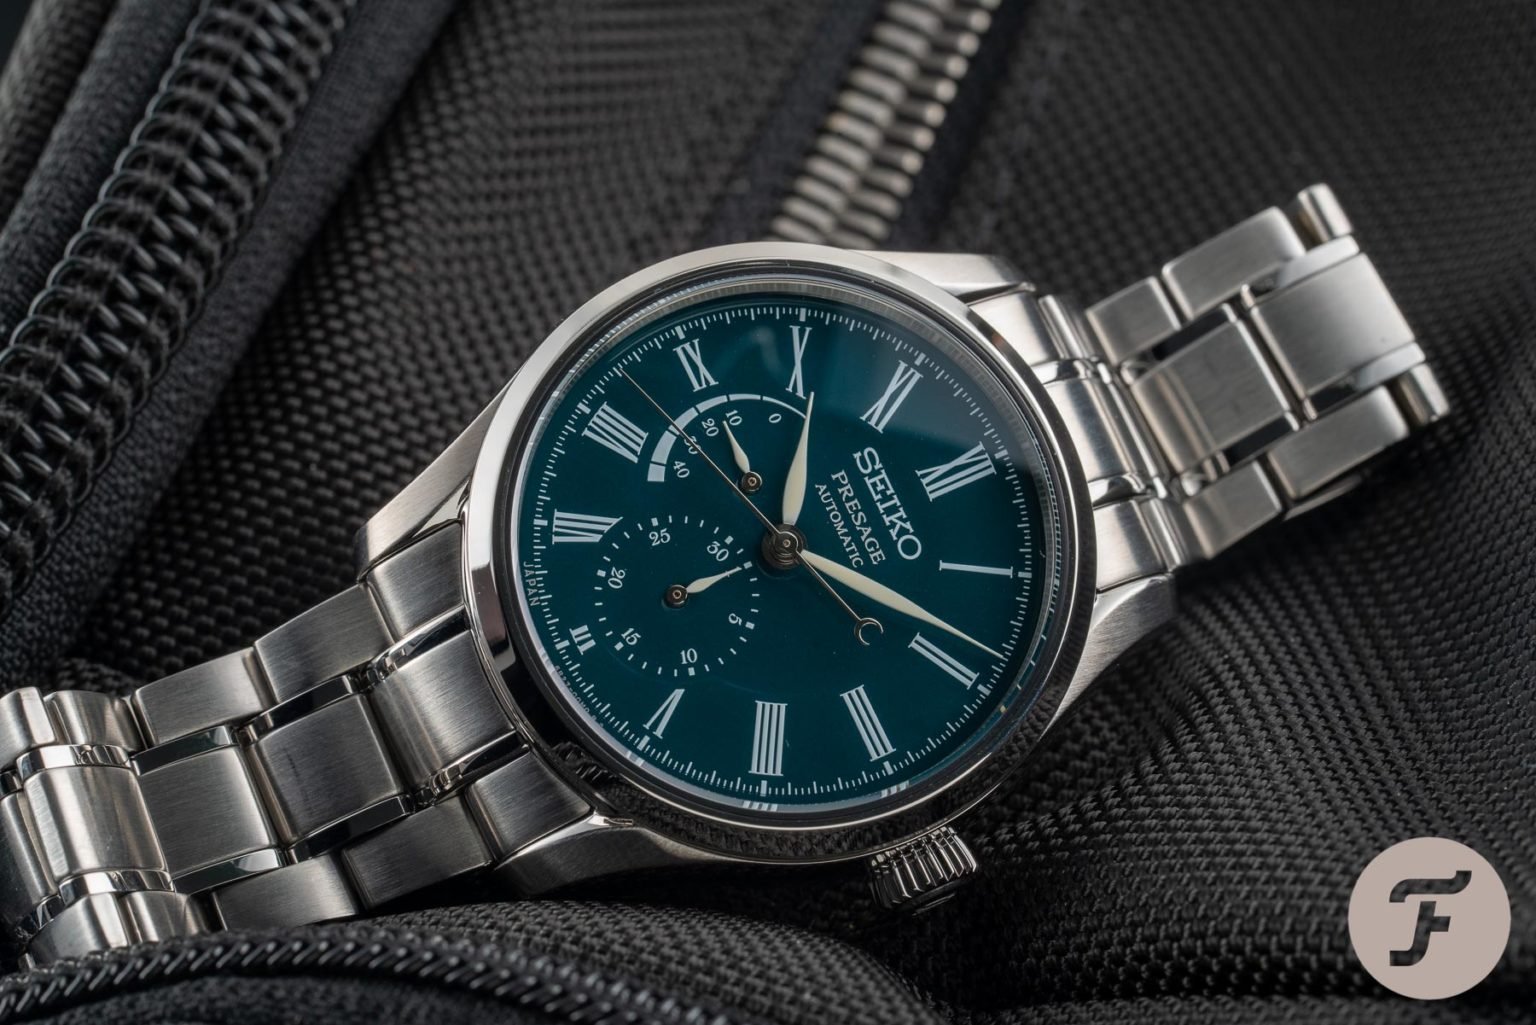 Hands-On With the Seiko Presage SPB173J1 Limited Edition Watch